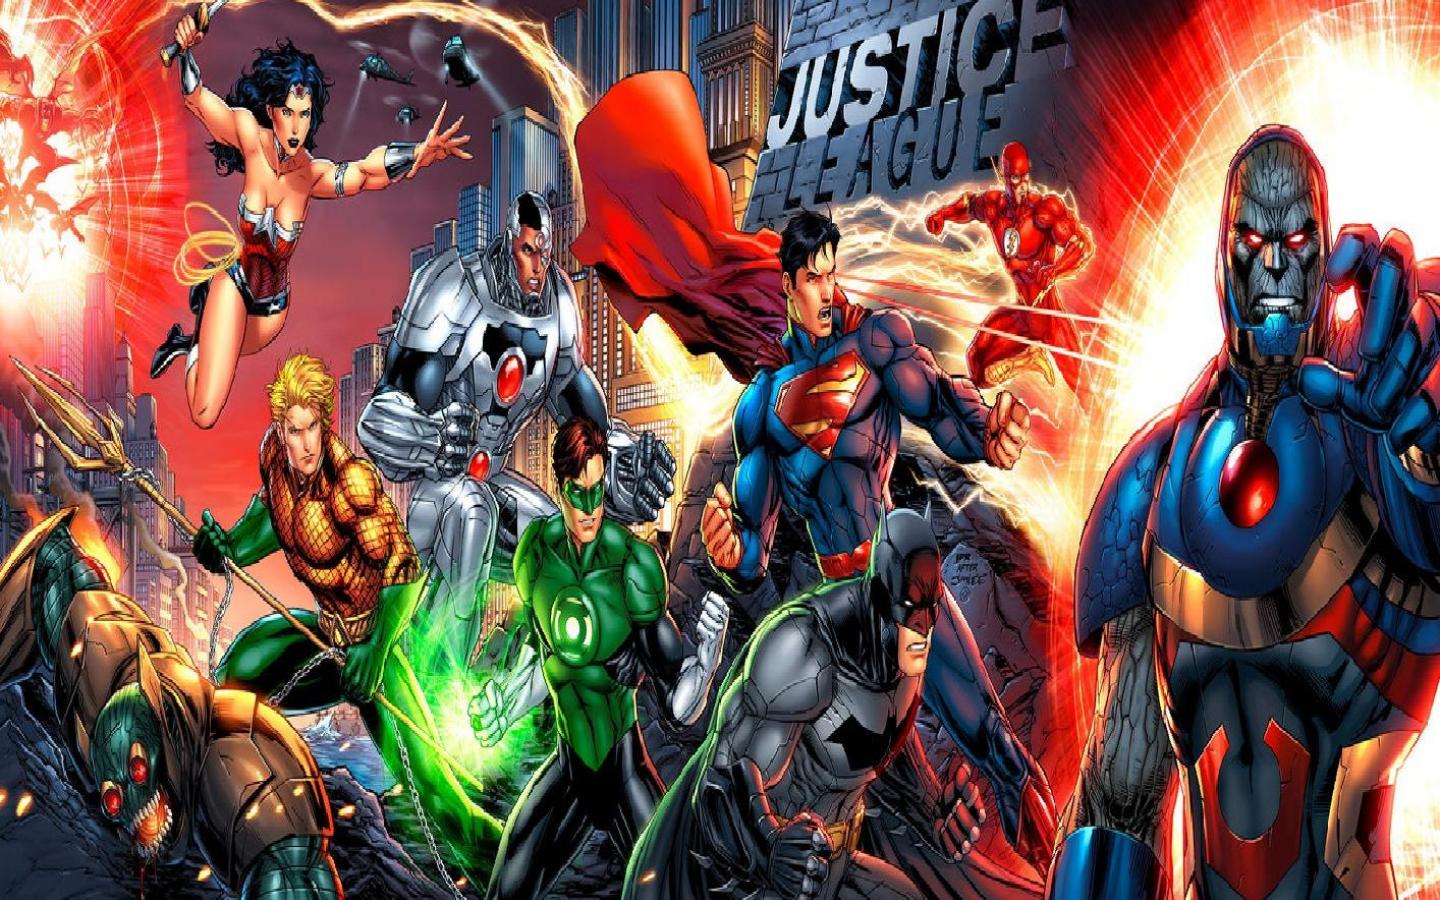 Justice league   157992   High Quality and Resolution Wallpapers on